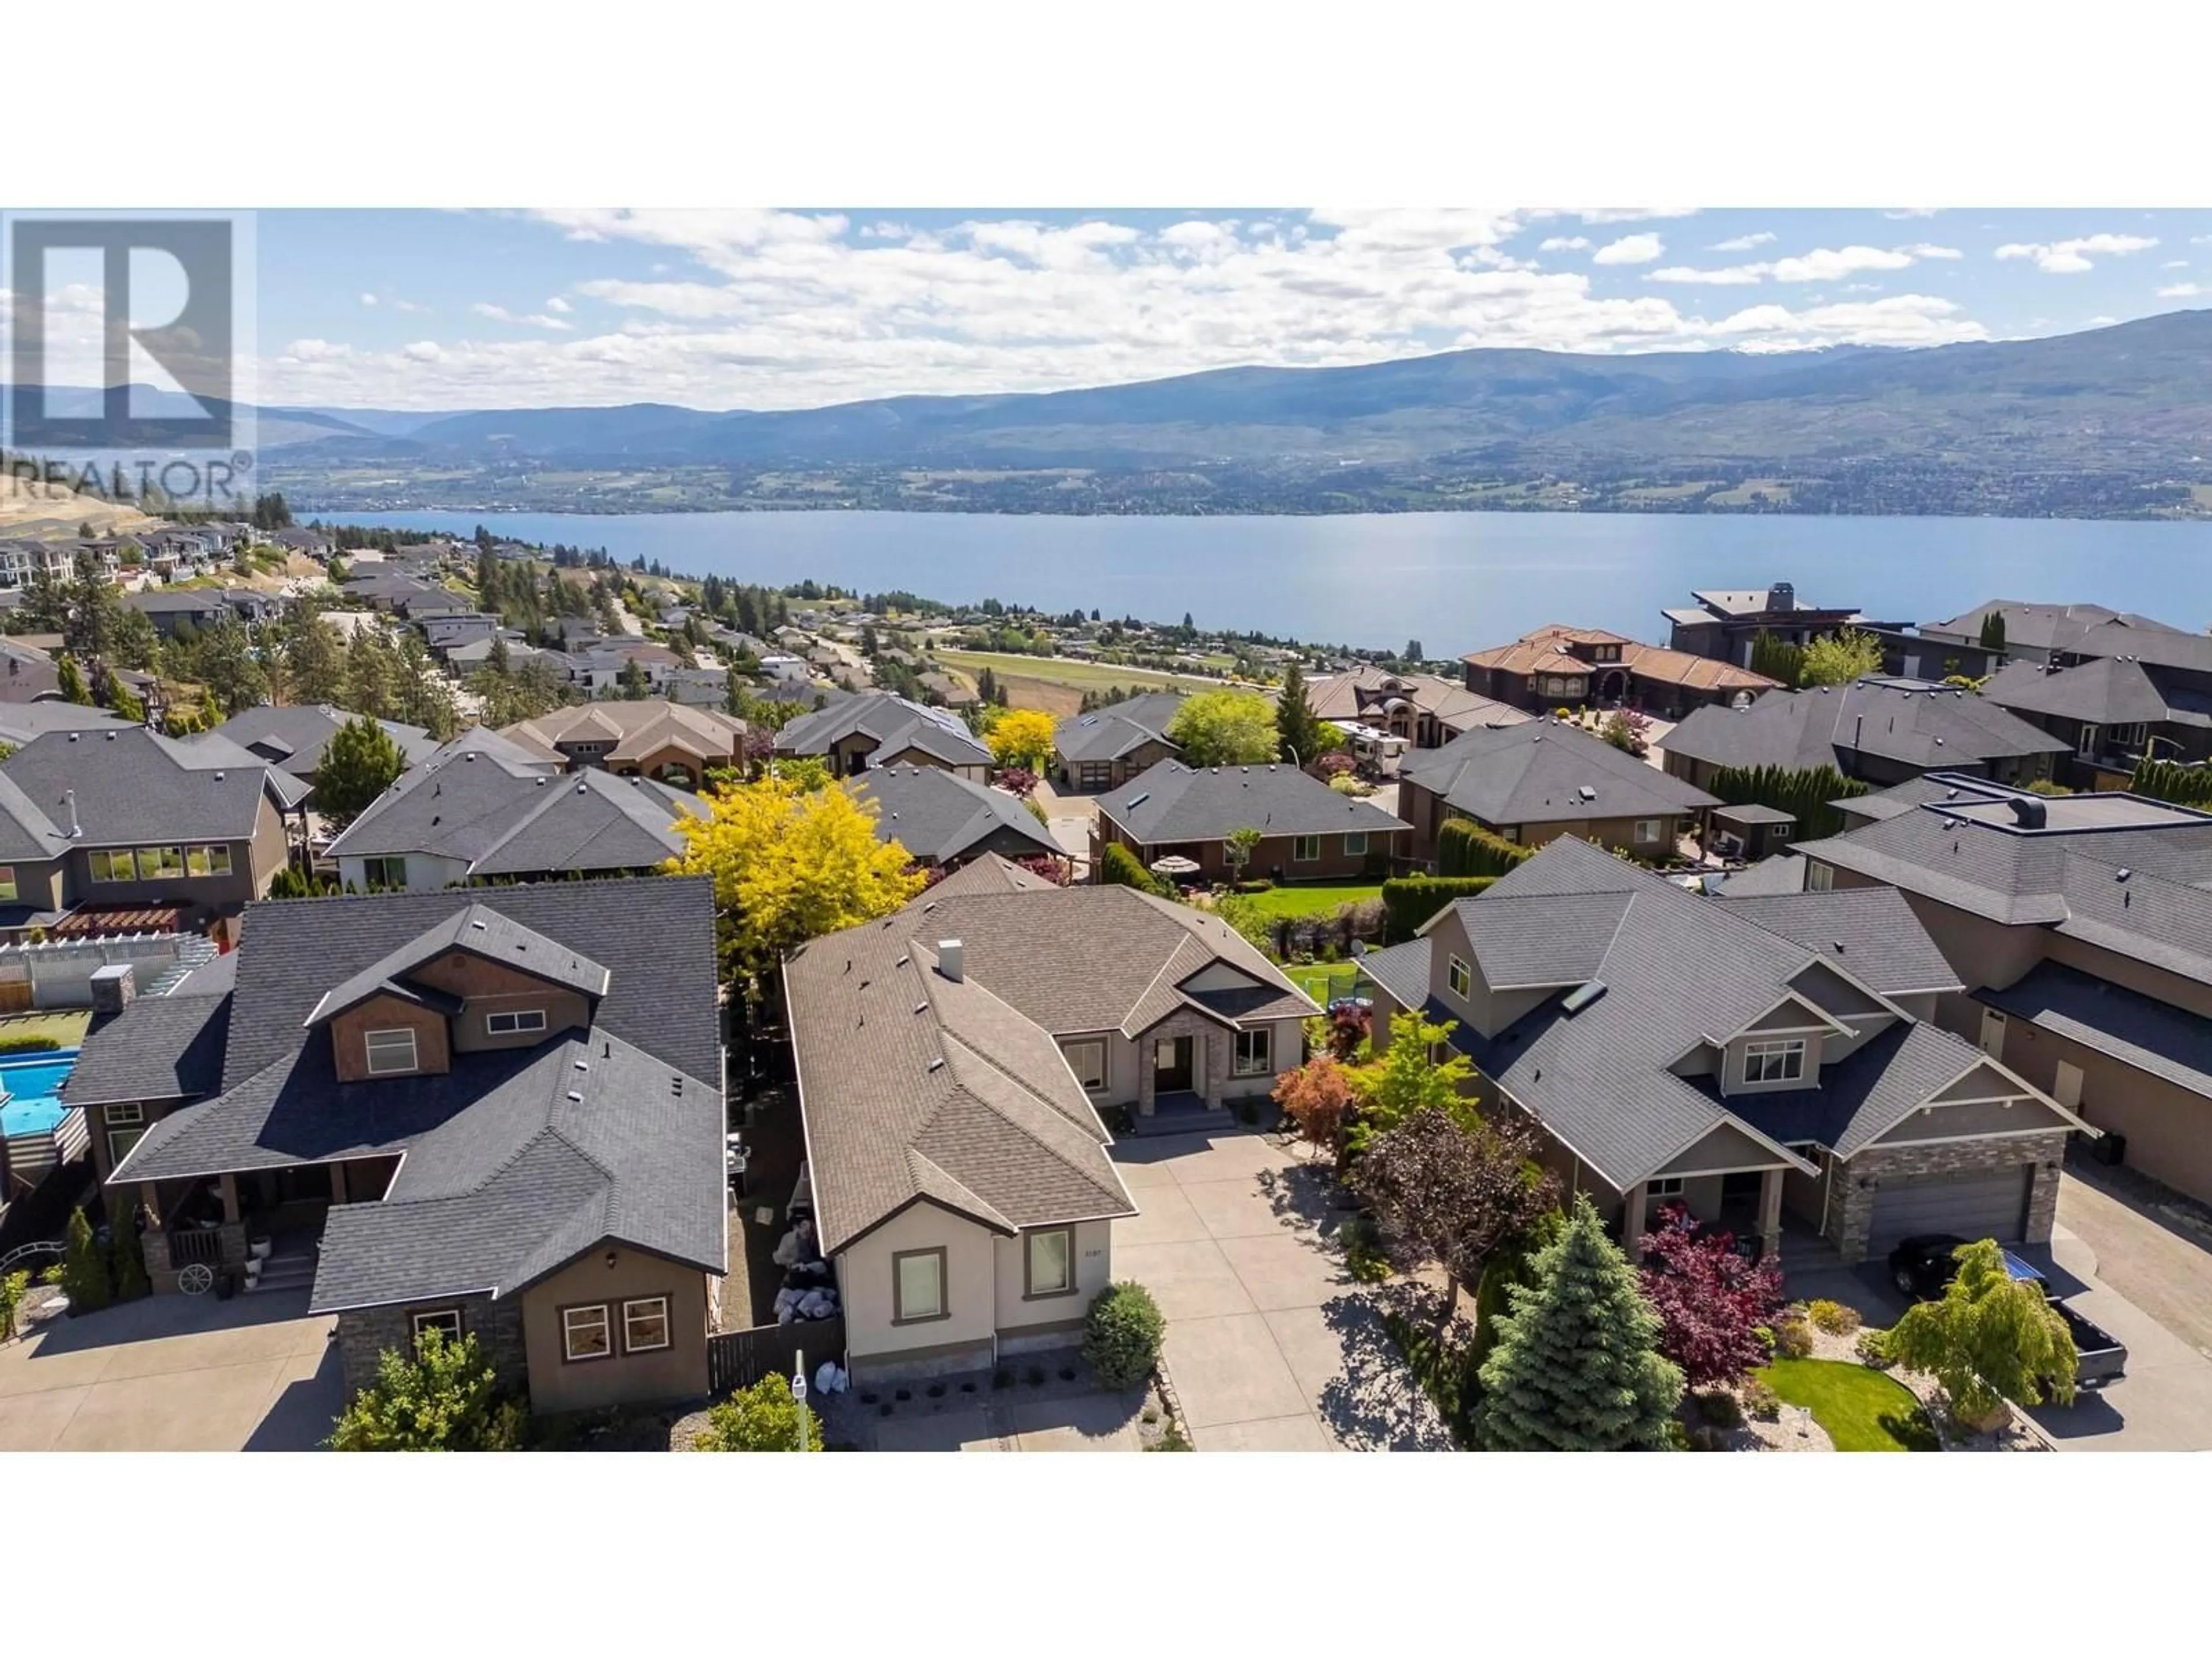 Lakeview for 3197 Malbec Crescent, West Kelowna British Columbia V4T3B5